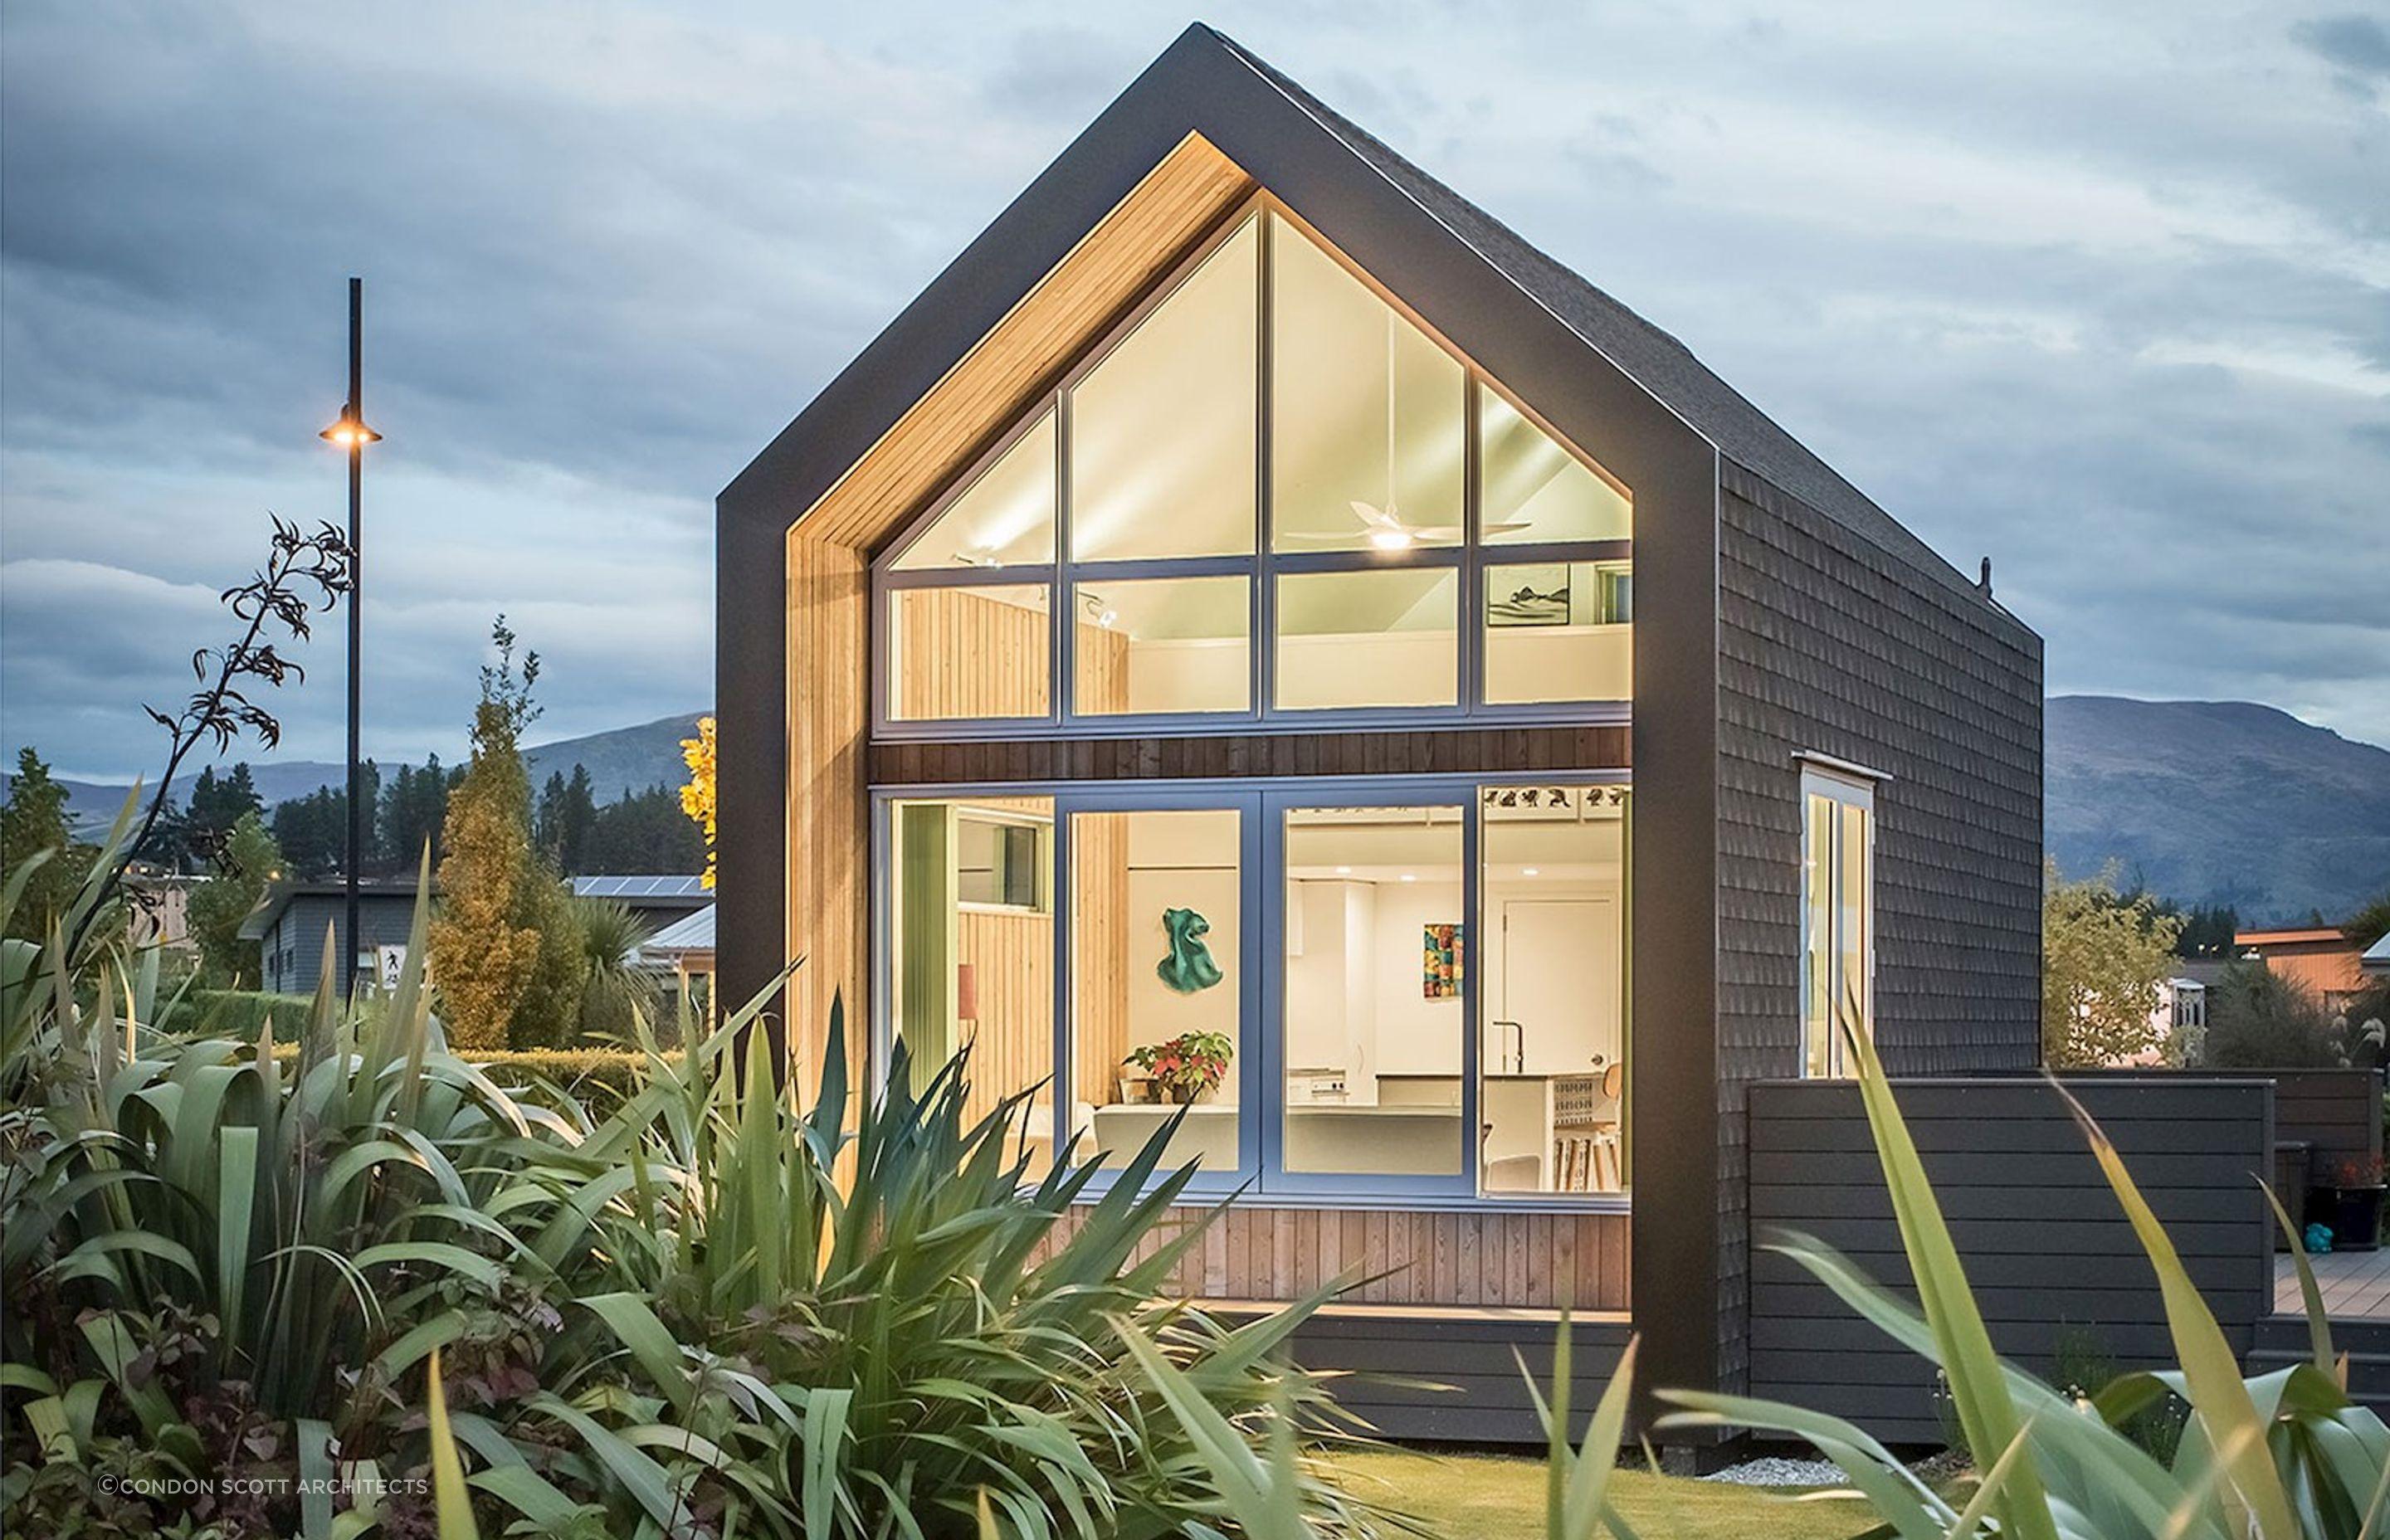 Following rules and regulations is an essential part of strong tiny home design, and they don't come much better than the Kirimoko Tiny House in Wanaka.